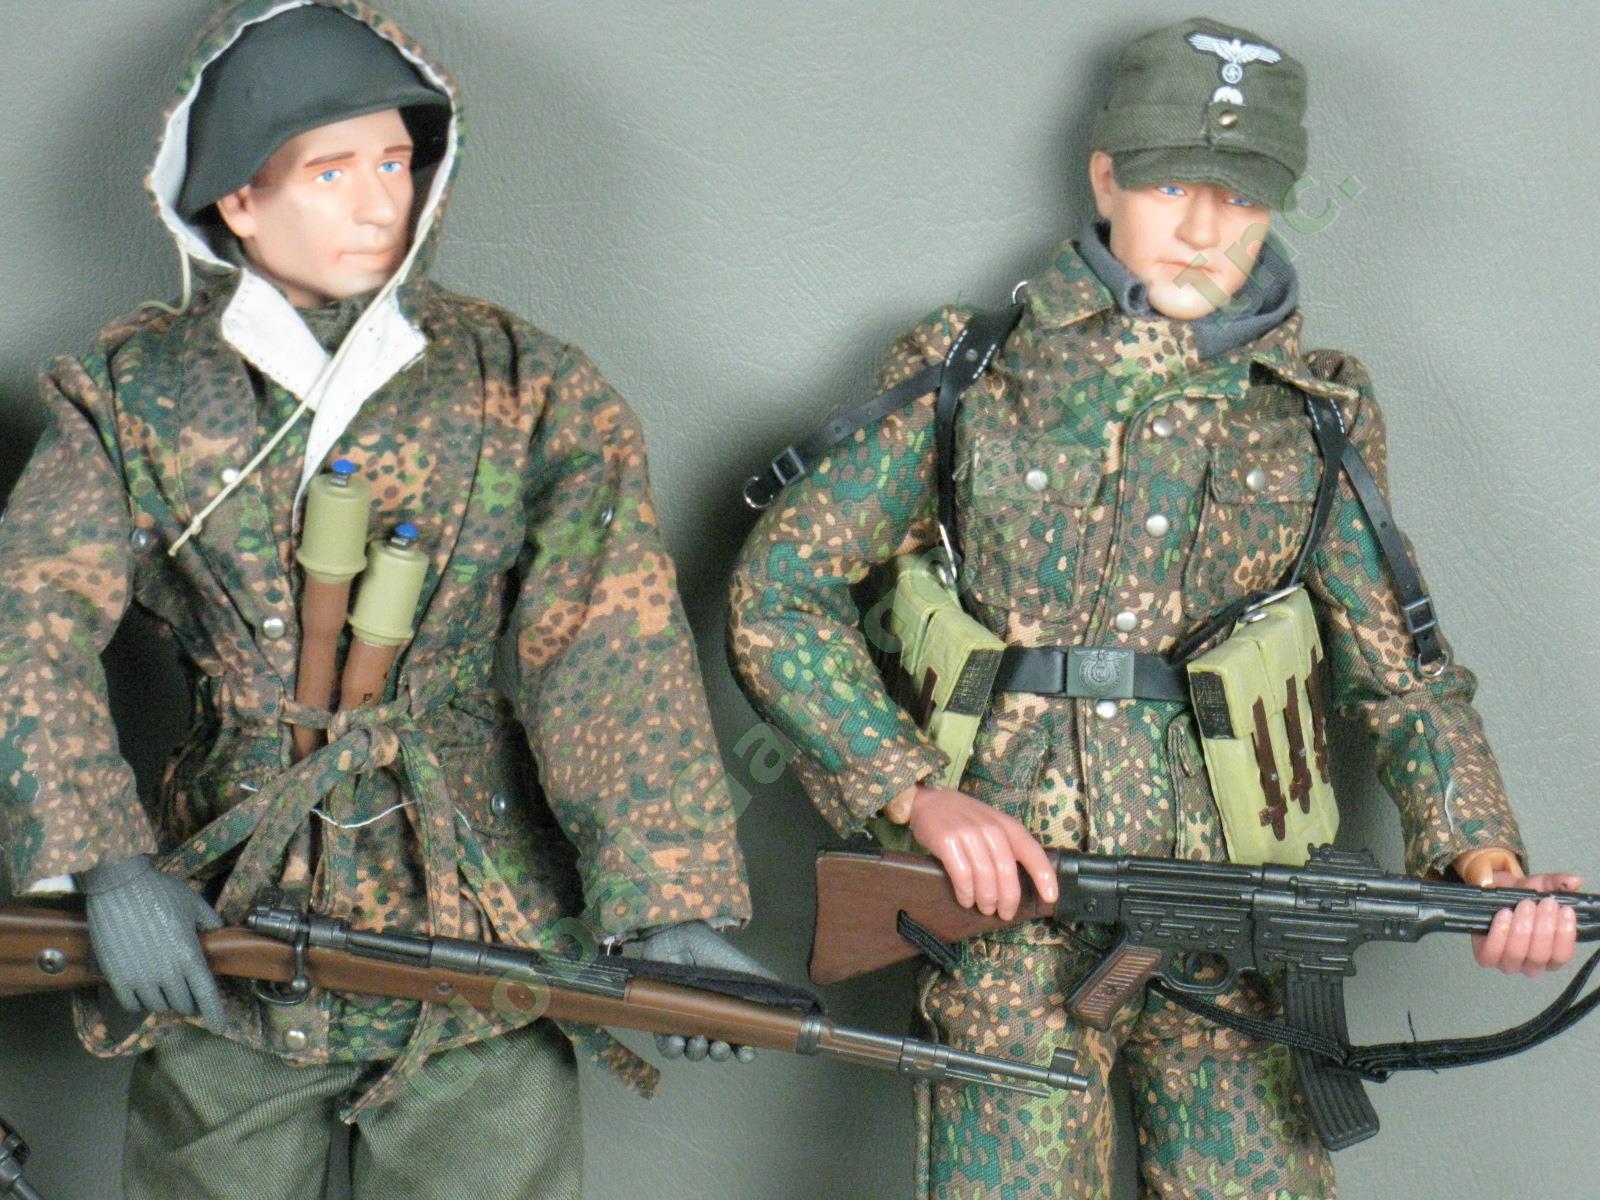 6 Dragon 1/6 Scale 12" WWII German Camo Army Soldier Figures Lot w/Accessories 5